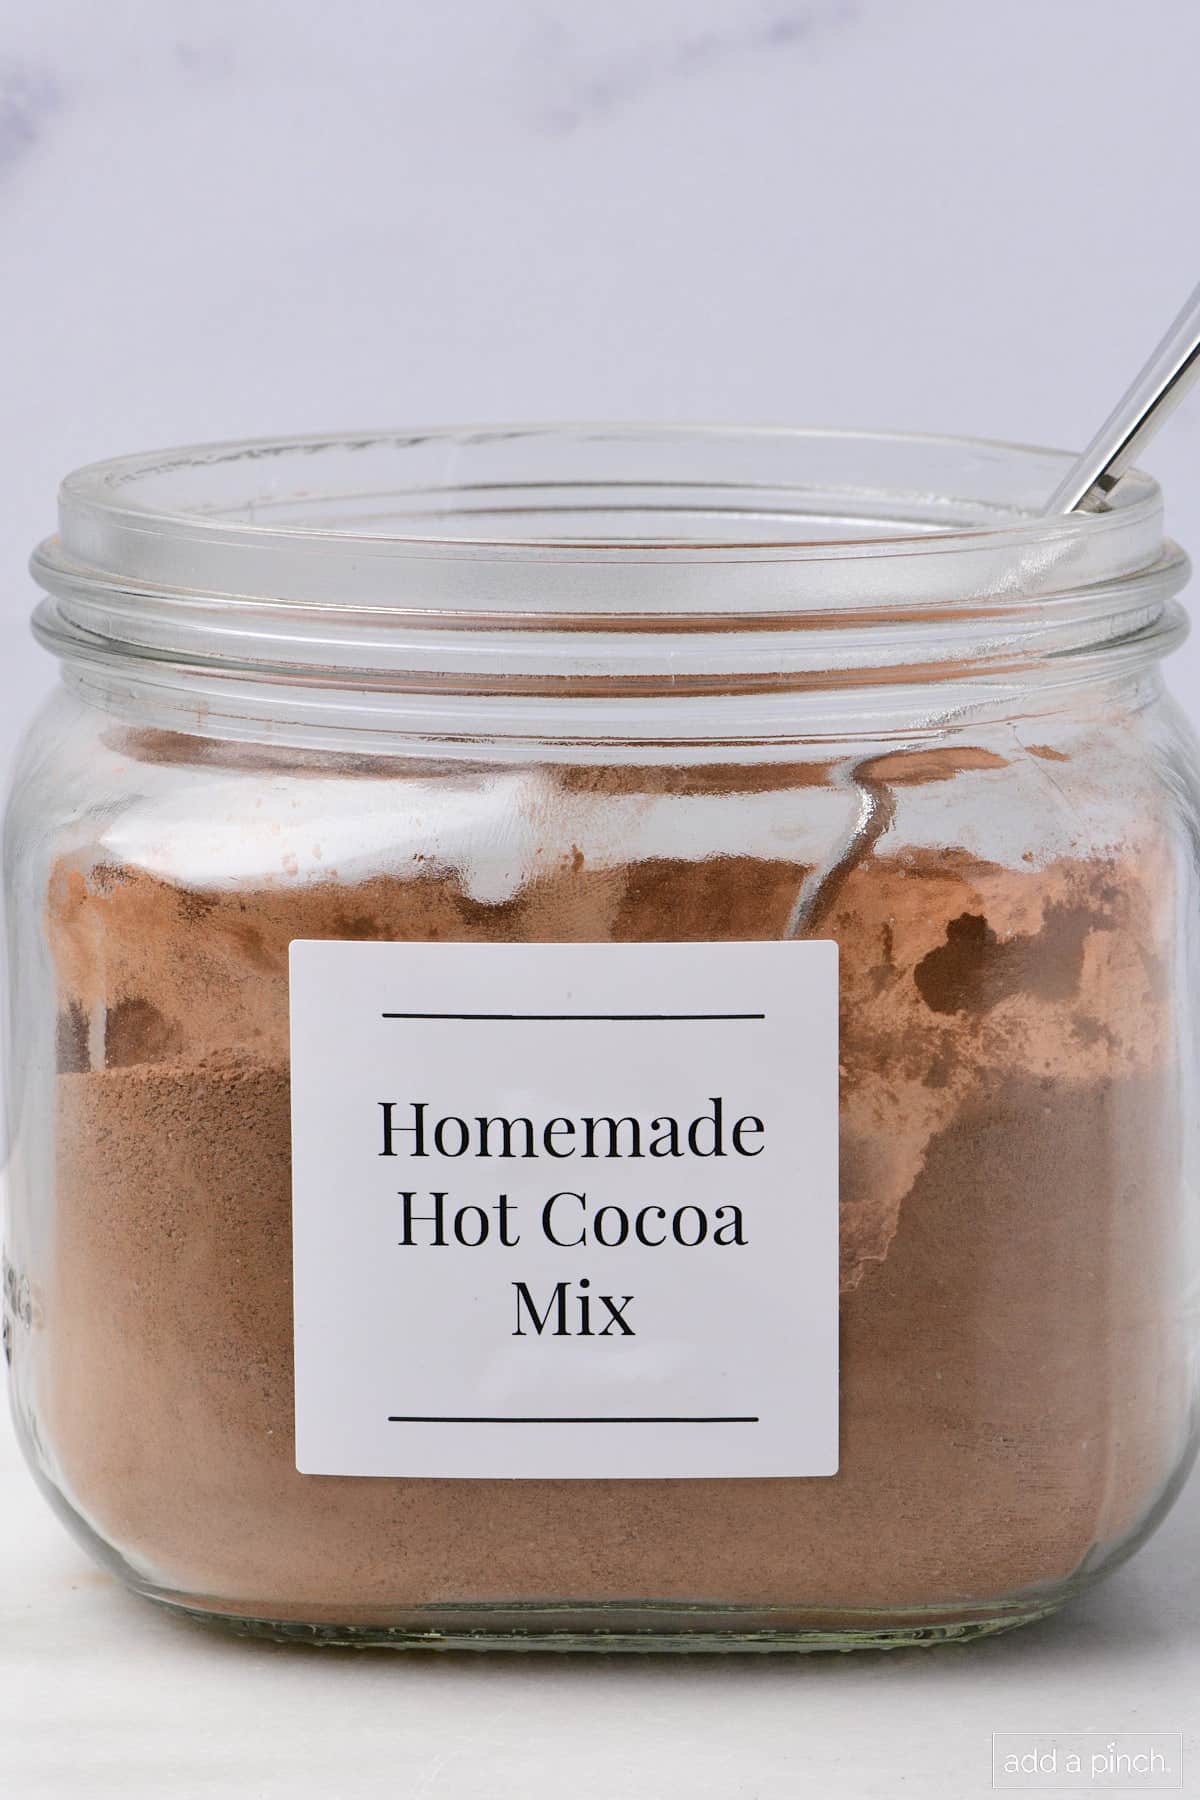 Homemade hot cocoa mix in a glass jar.